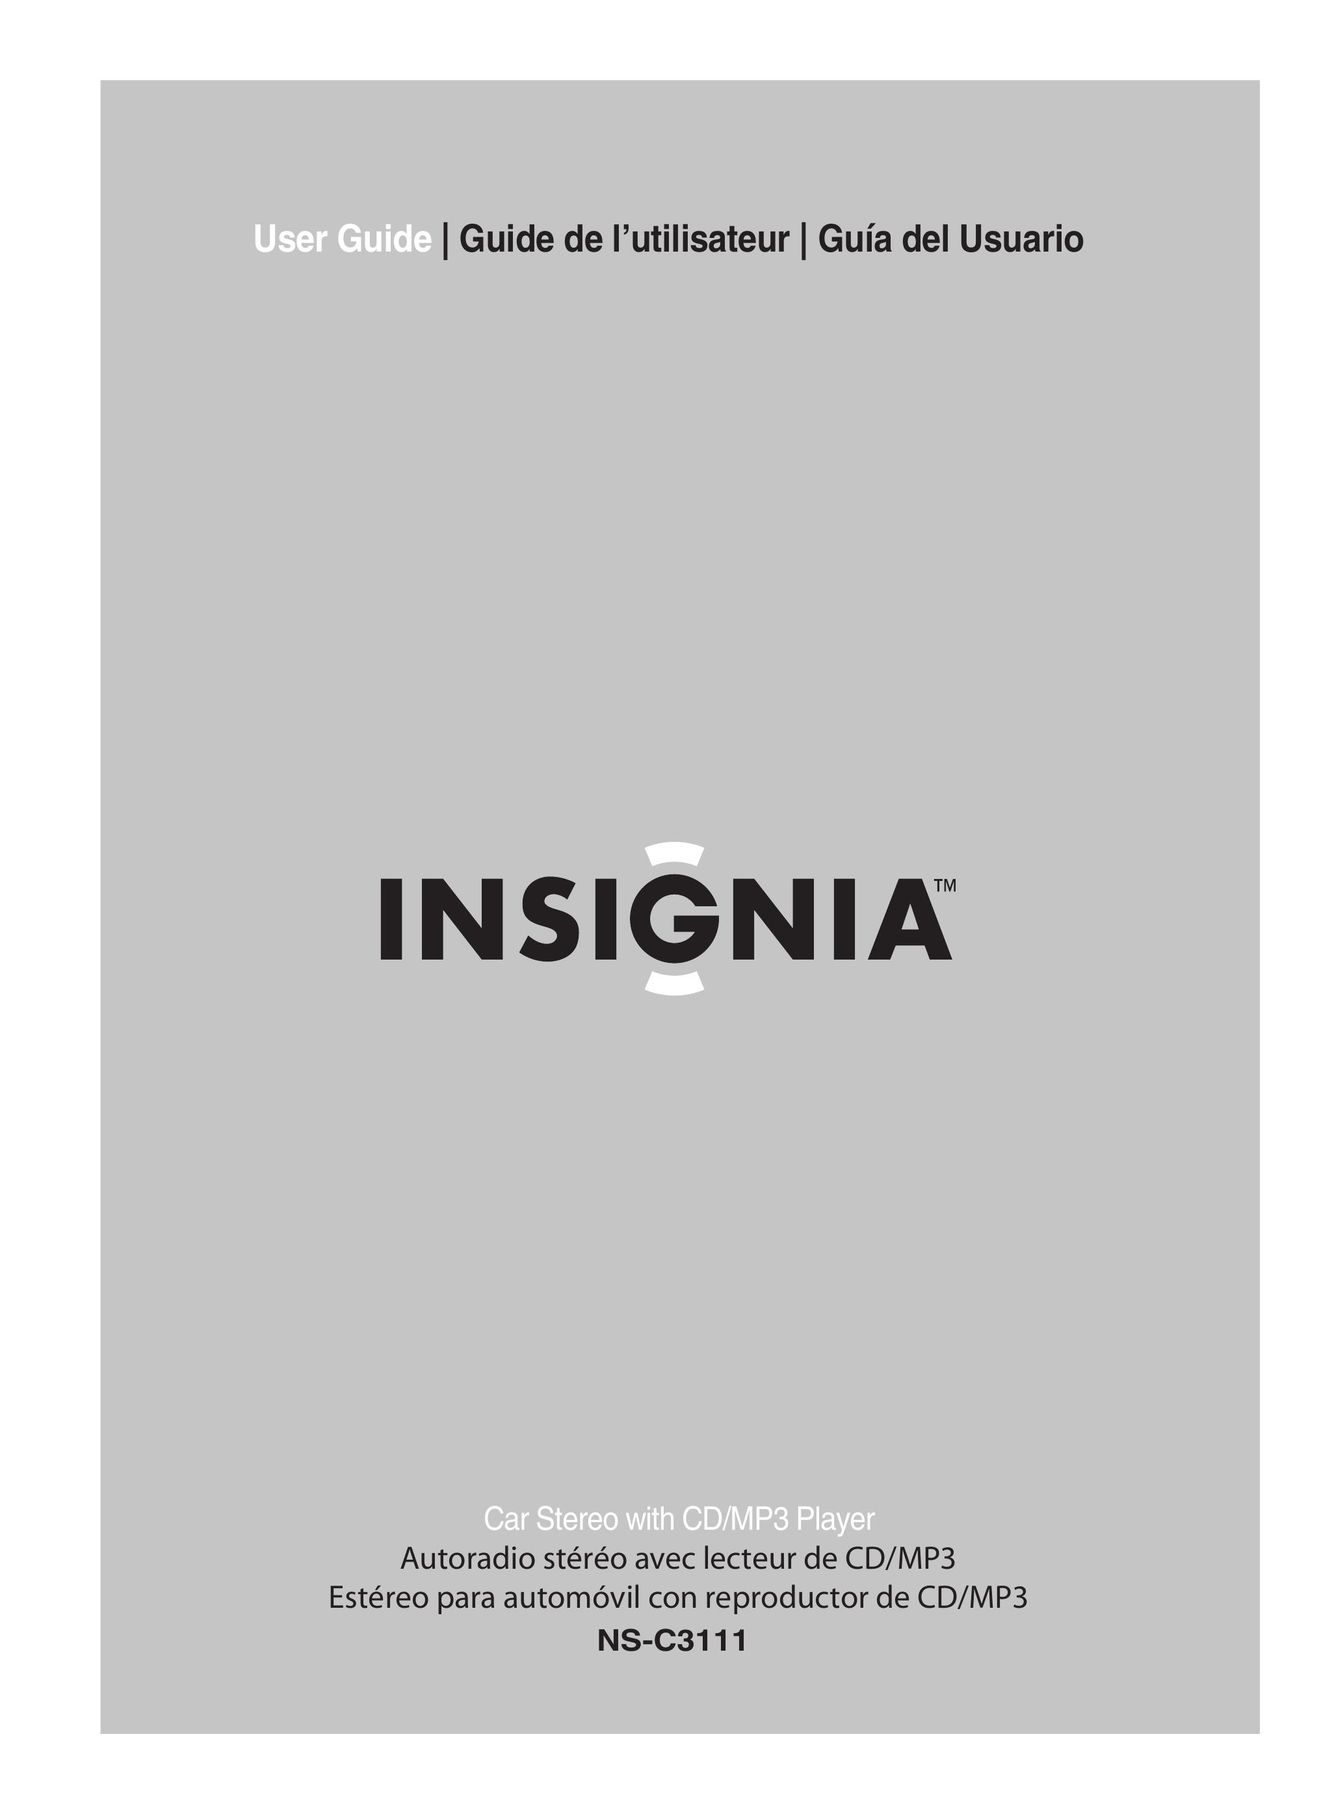 Insignia NS-C3111 Car Stereo System User Manual